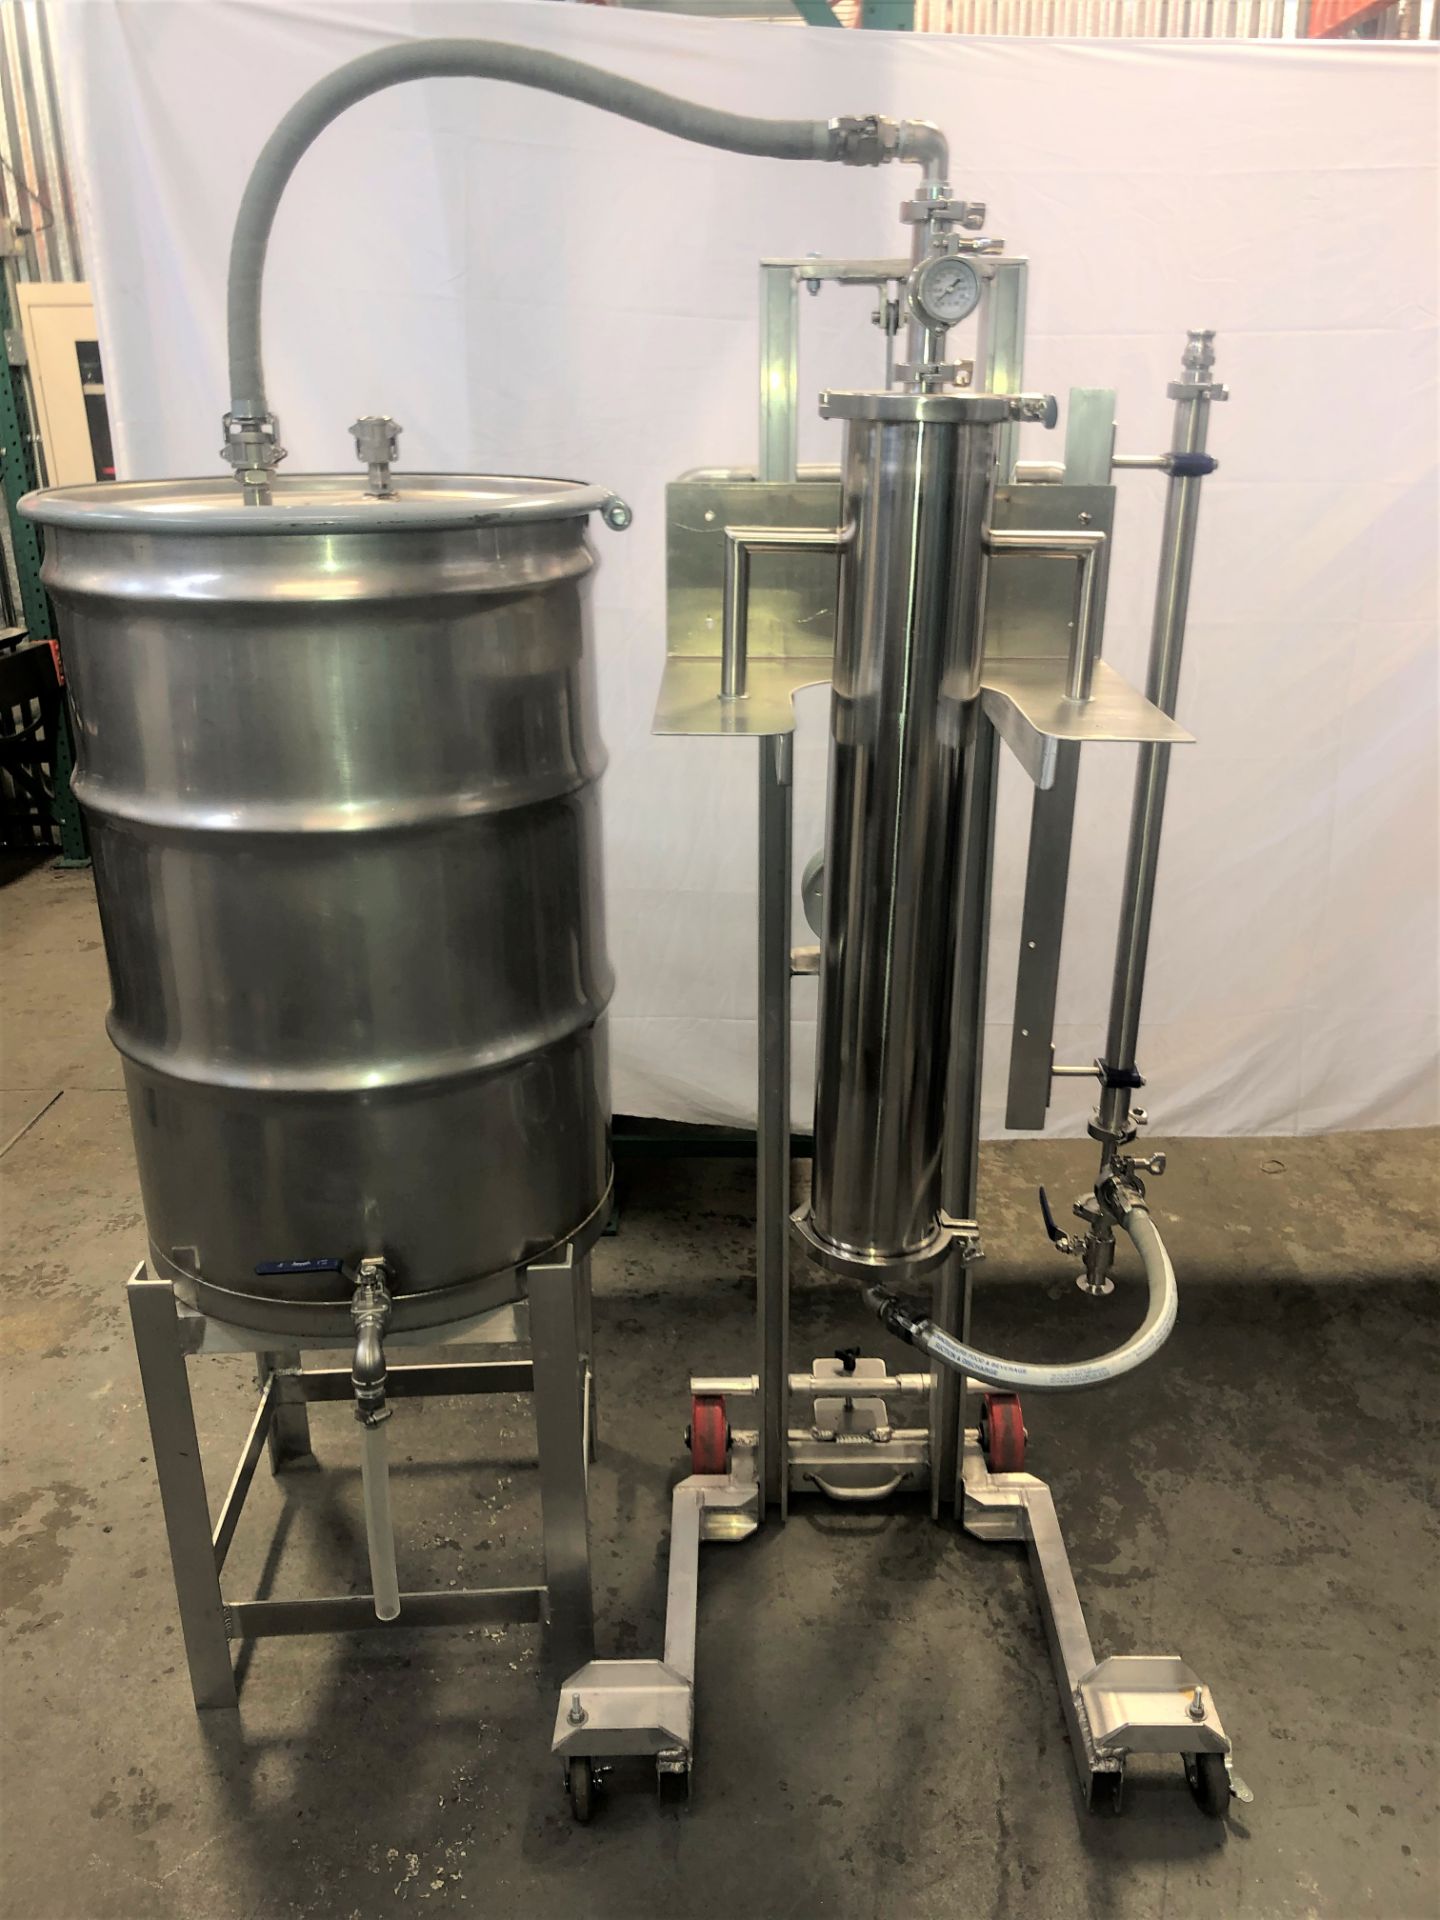 Used/Refurbished-CRCfilters Ethanol Dehydration System EDH-25. 25lb capacity 55 gal collection drum. - Image 3 of 6